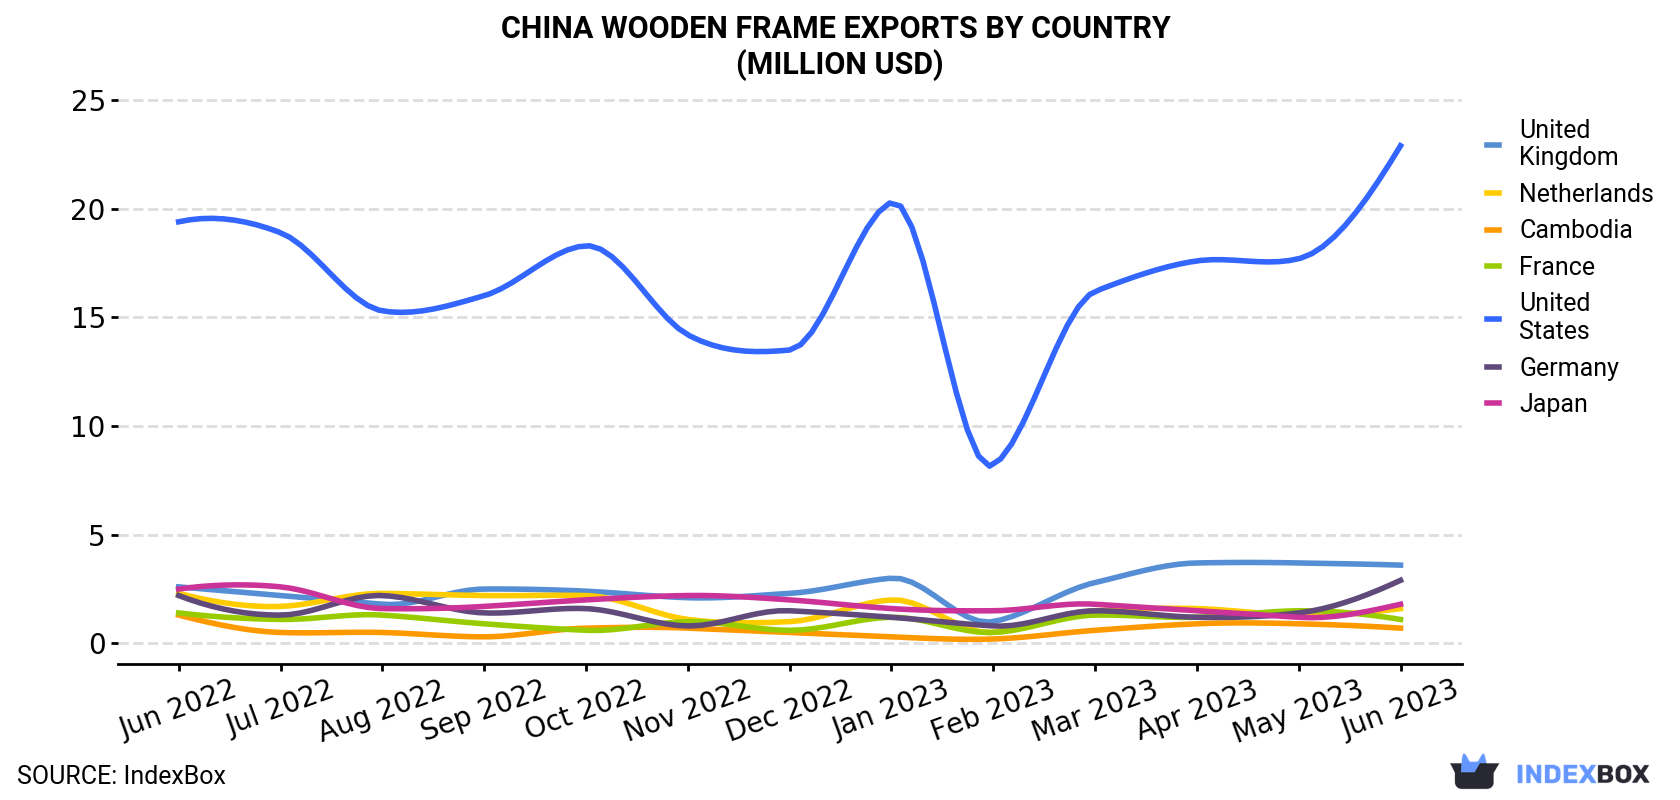 China Wooden Frame Exports By Country (Million USD)